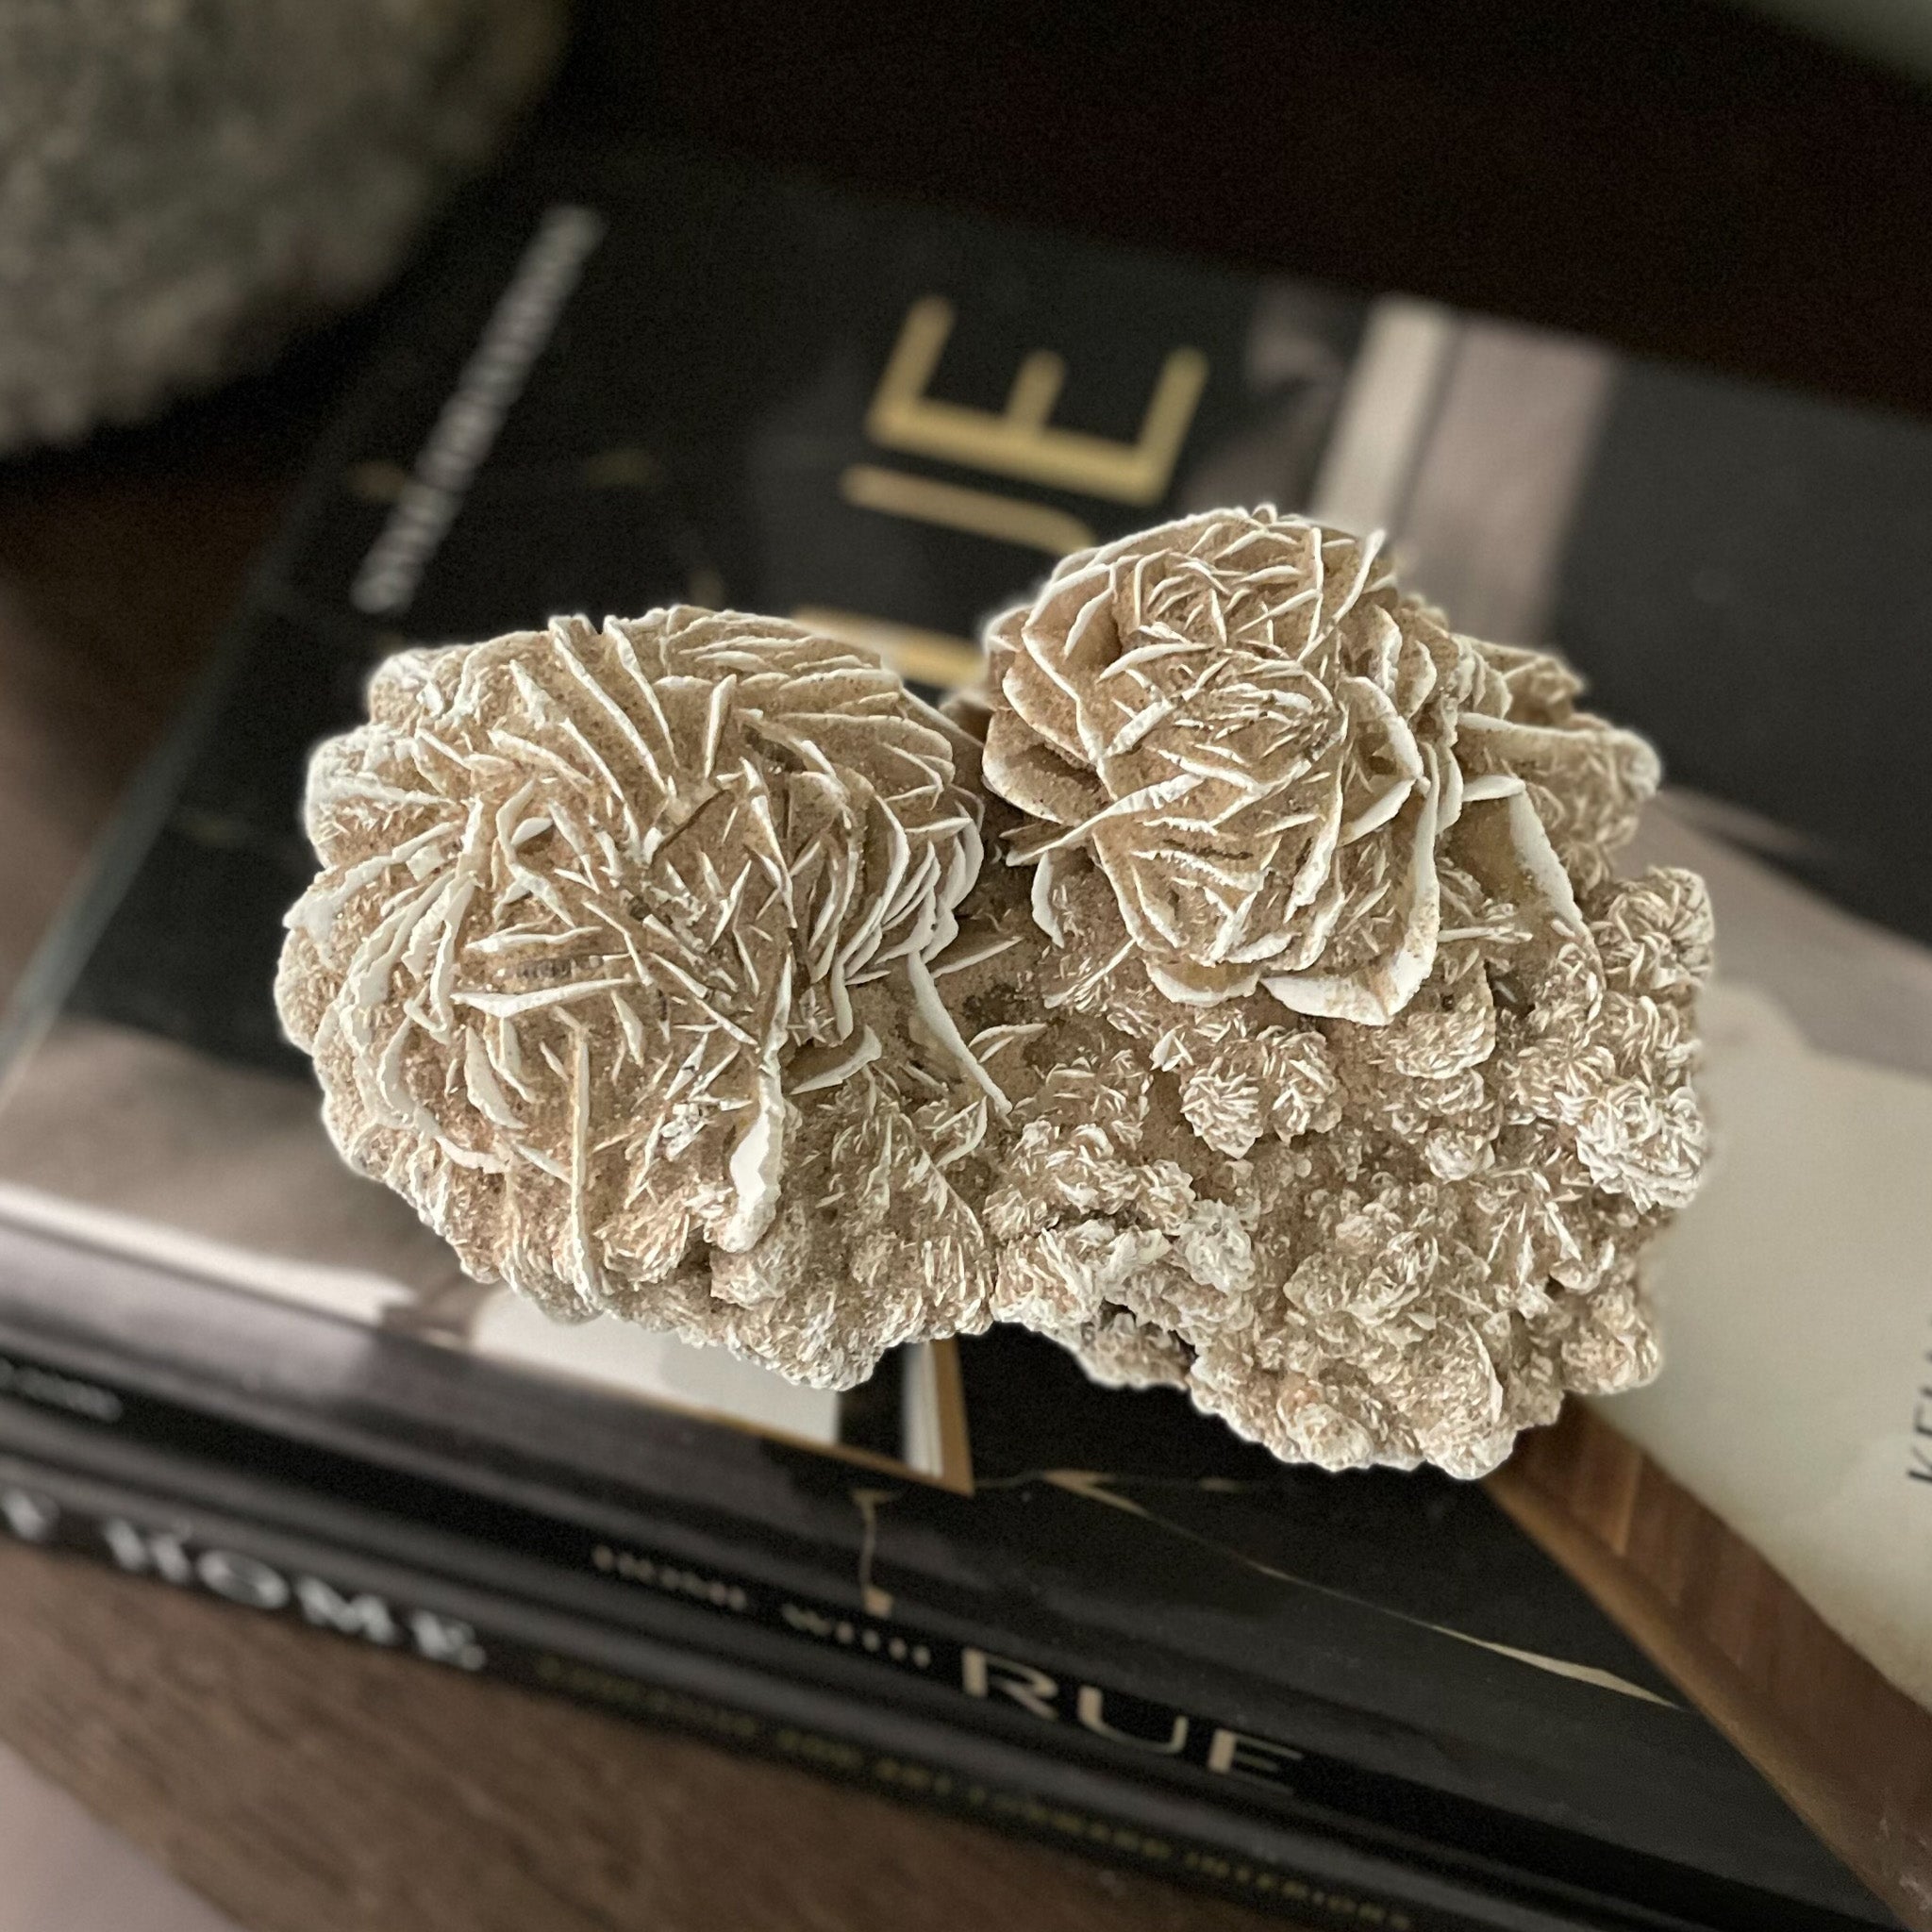 Mexican Desert Rose, Mexican Selenite, Natural Home Accents